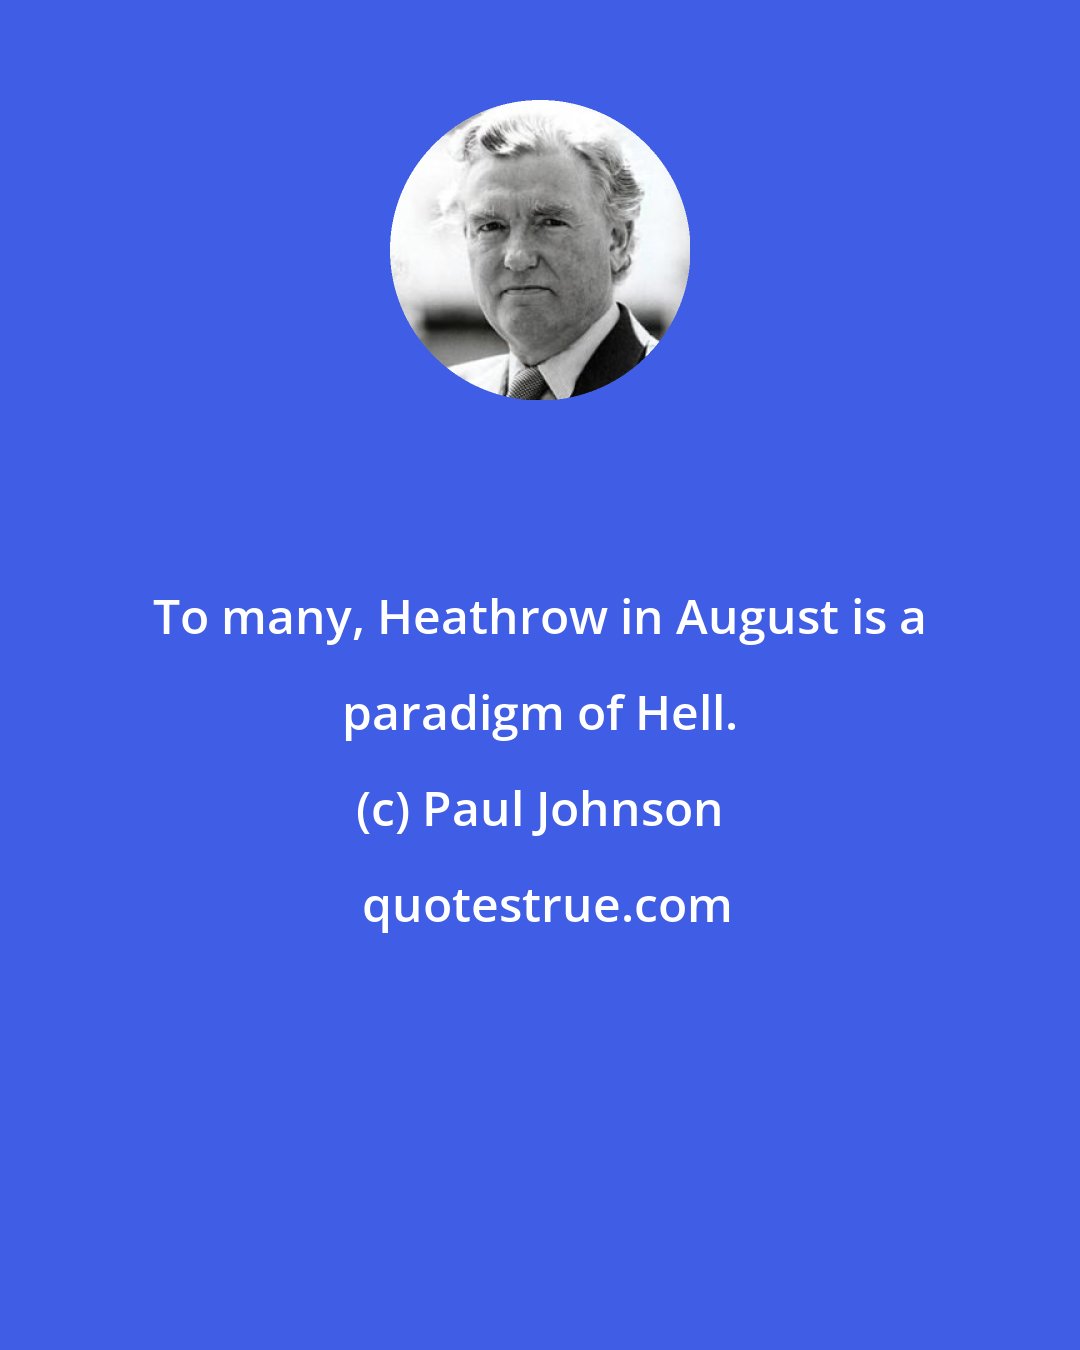 Paul Johnson: To many, Heathrow in August is a paradigm of Hell.